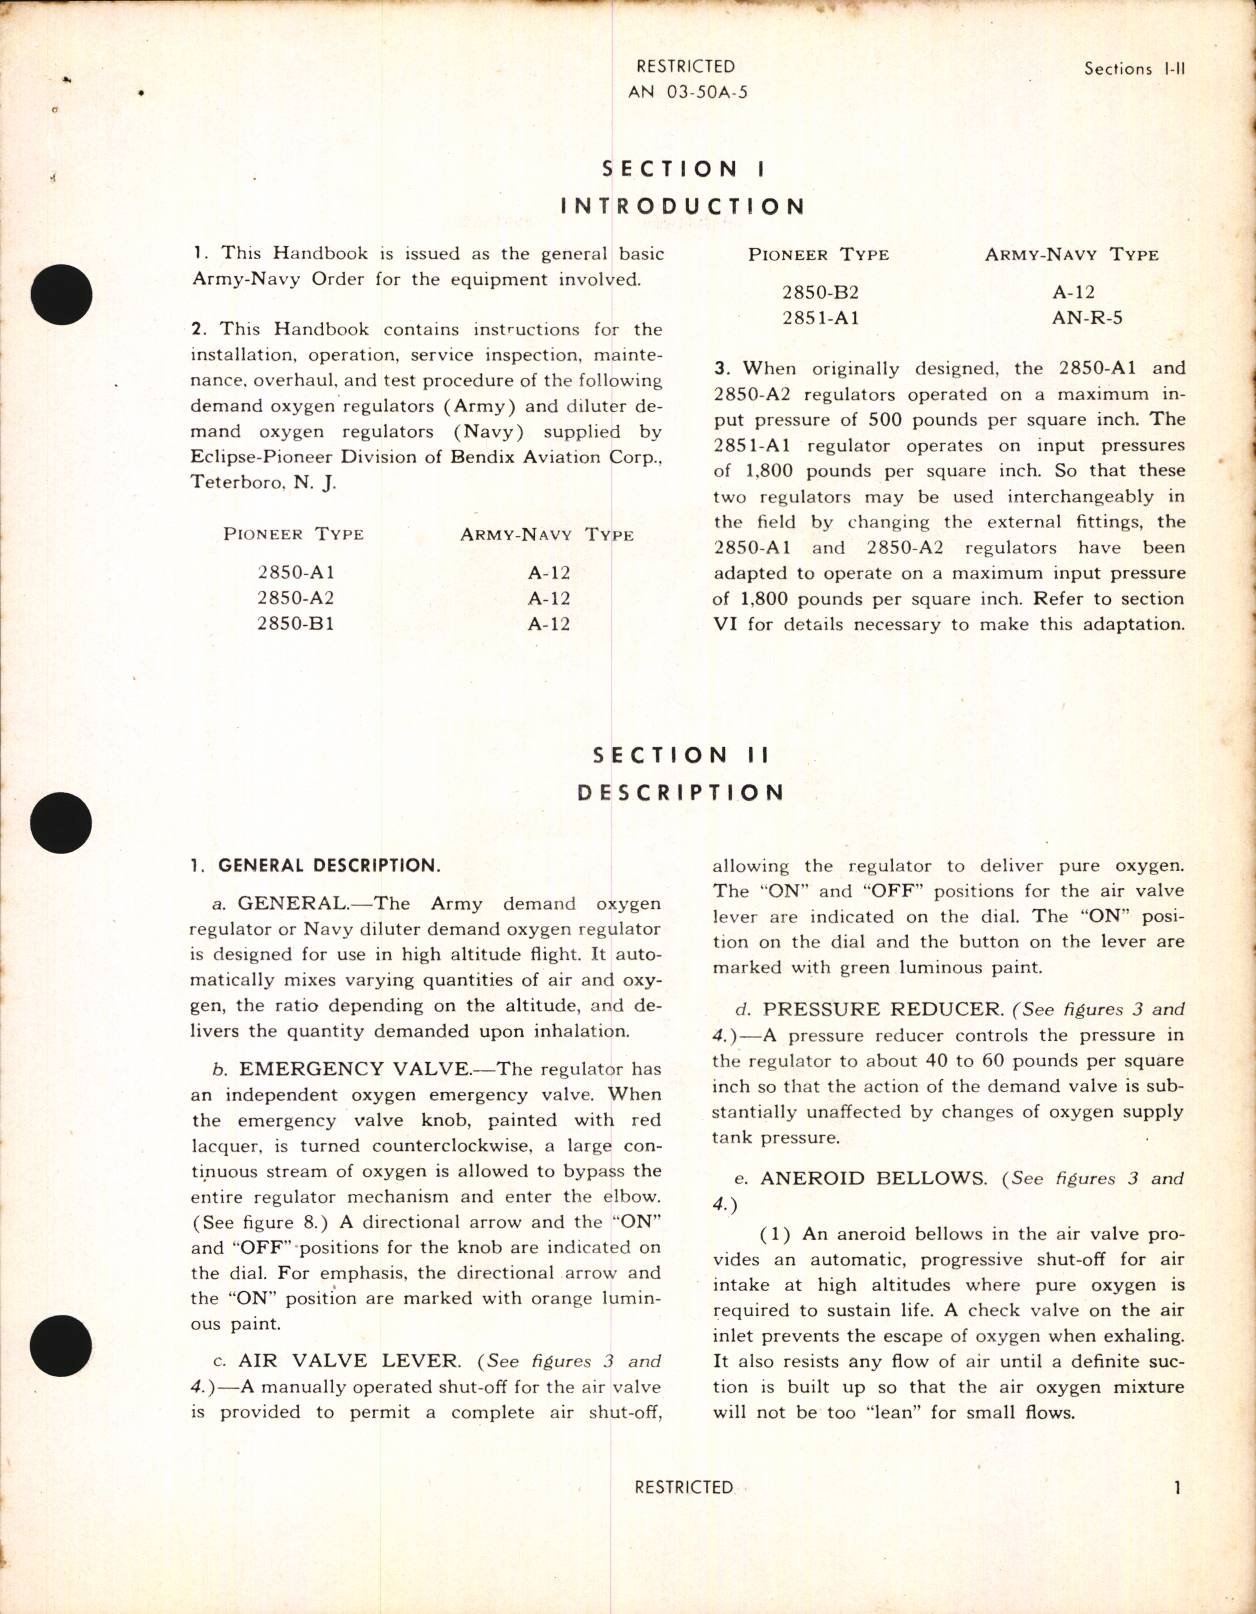 Sample page 5 from AirCorps Library document: Handbook of Instructions with Parts Catalog for Diluter Demand Oxygen Regulator